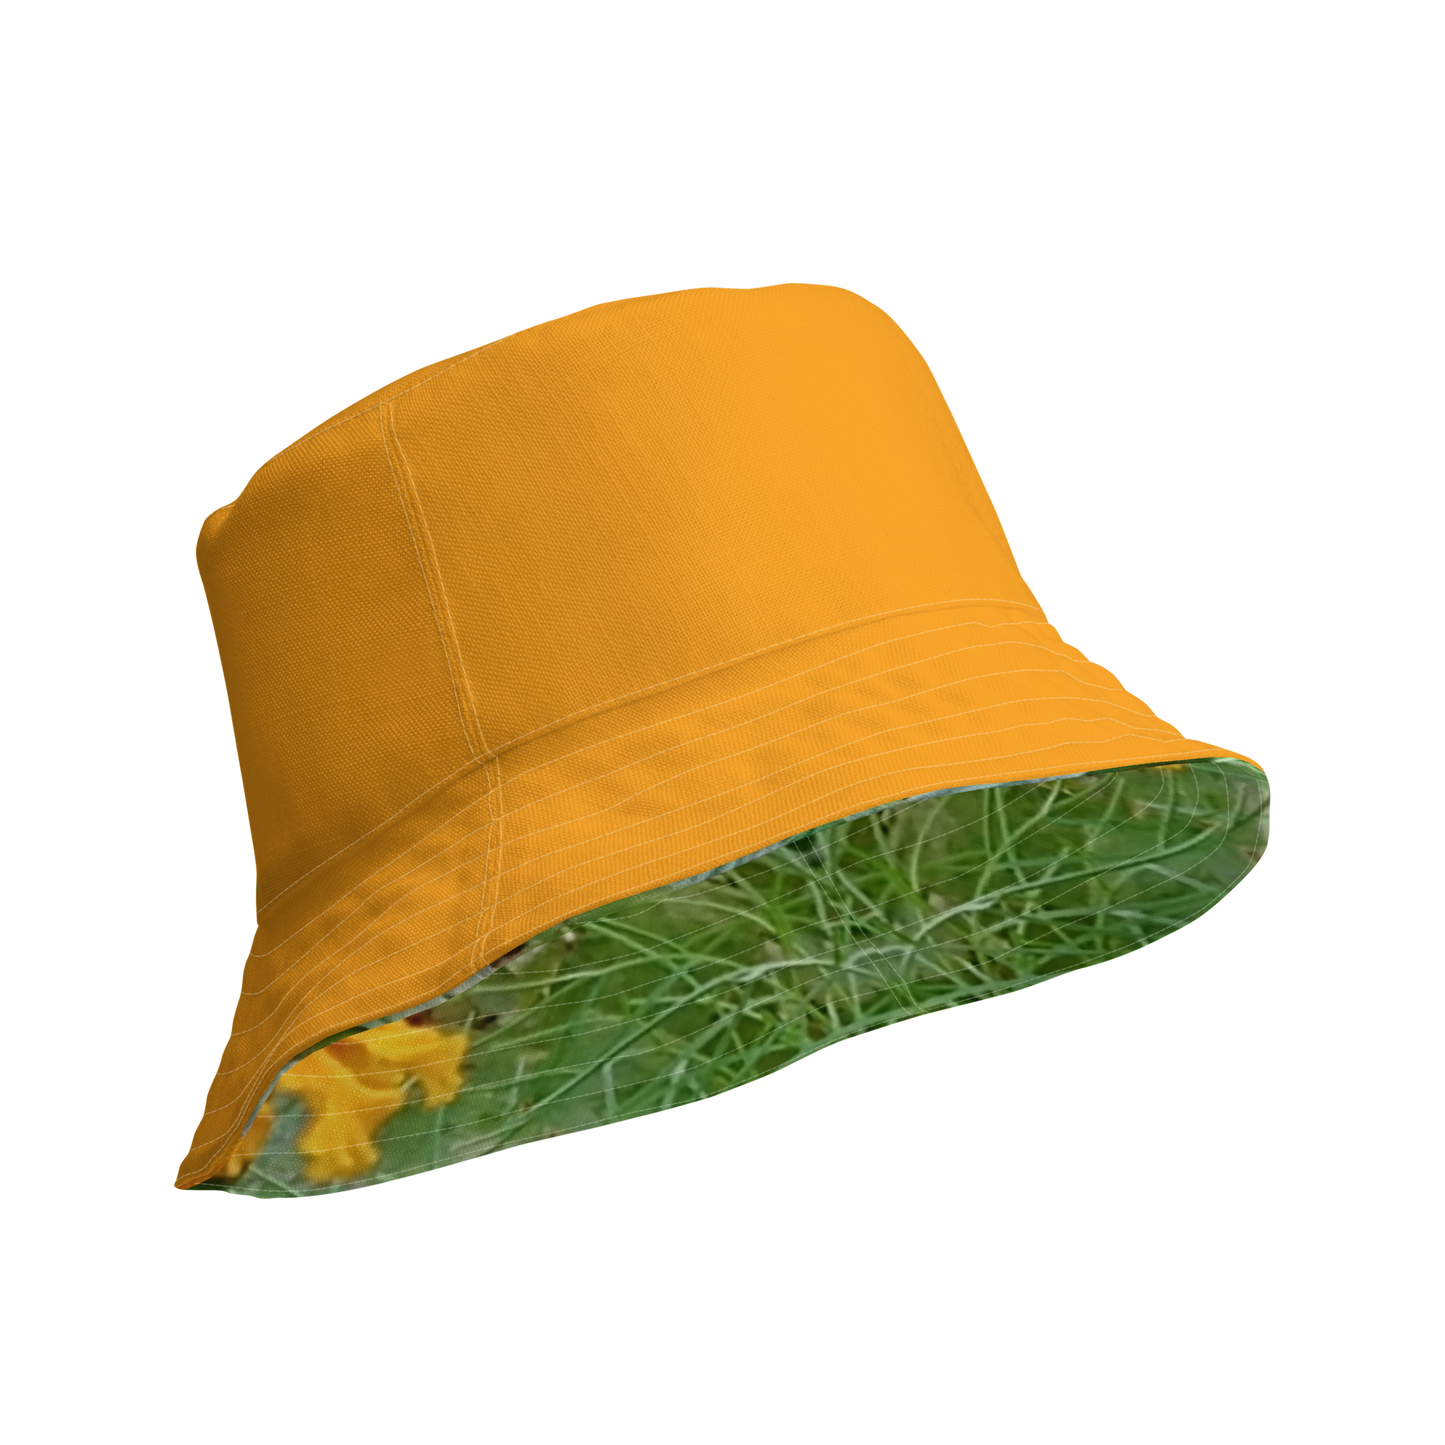 The FLOWER LOVE Collection - "Butterfly on a Bloom" Design Premium Reversible Bucket Hat - Orange Inside - Beach Hat, Gifts for Her